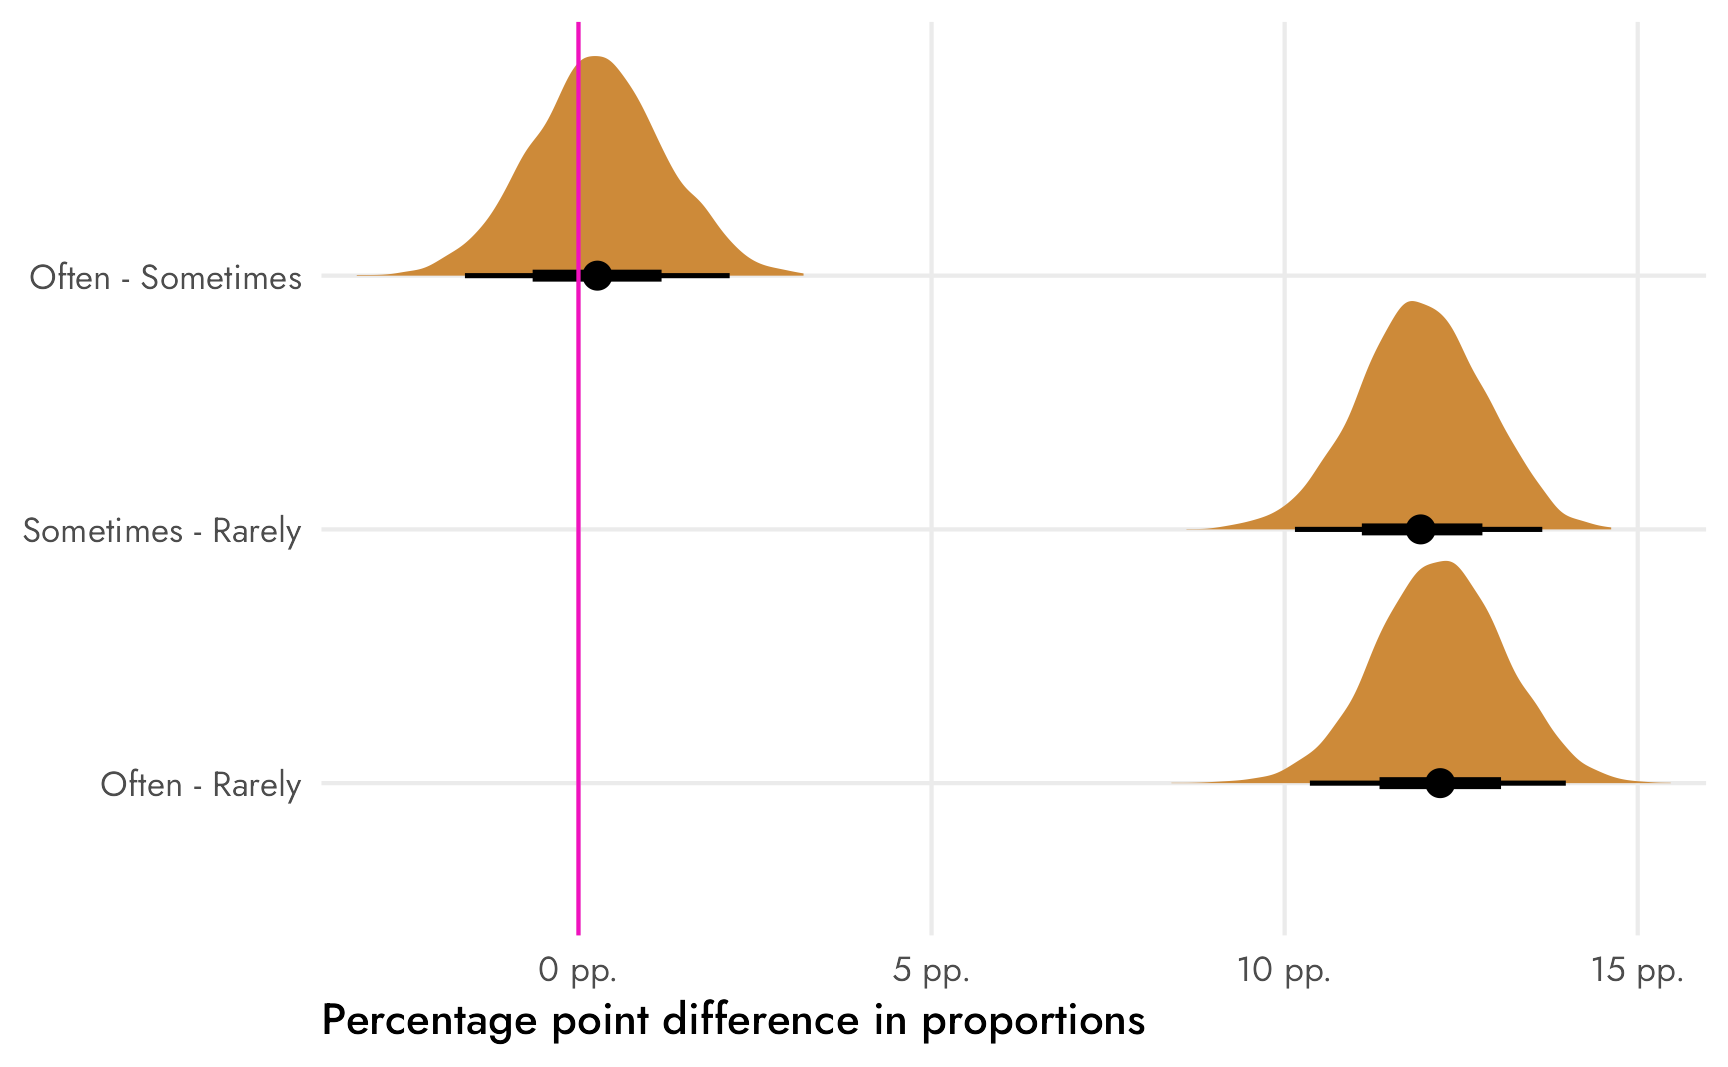 Posterior distributions of the differences between various frequencies of reading newspapers among American students; all density plots are filled with the same color for now